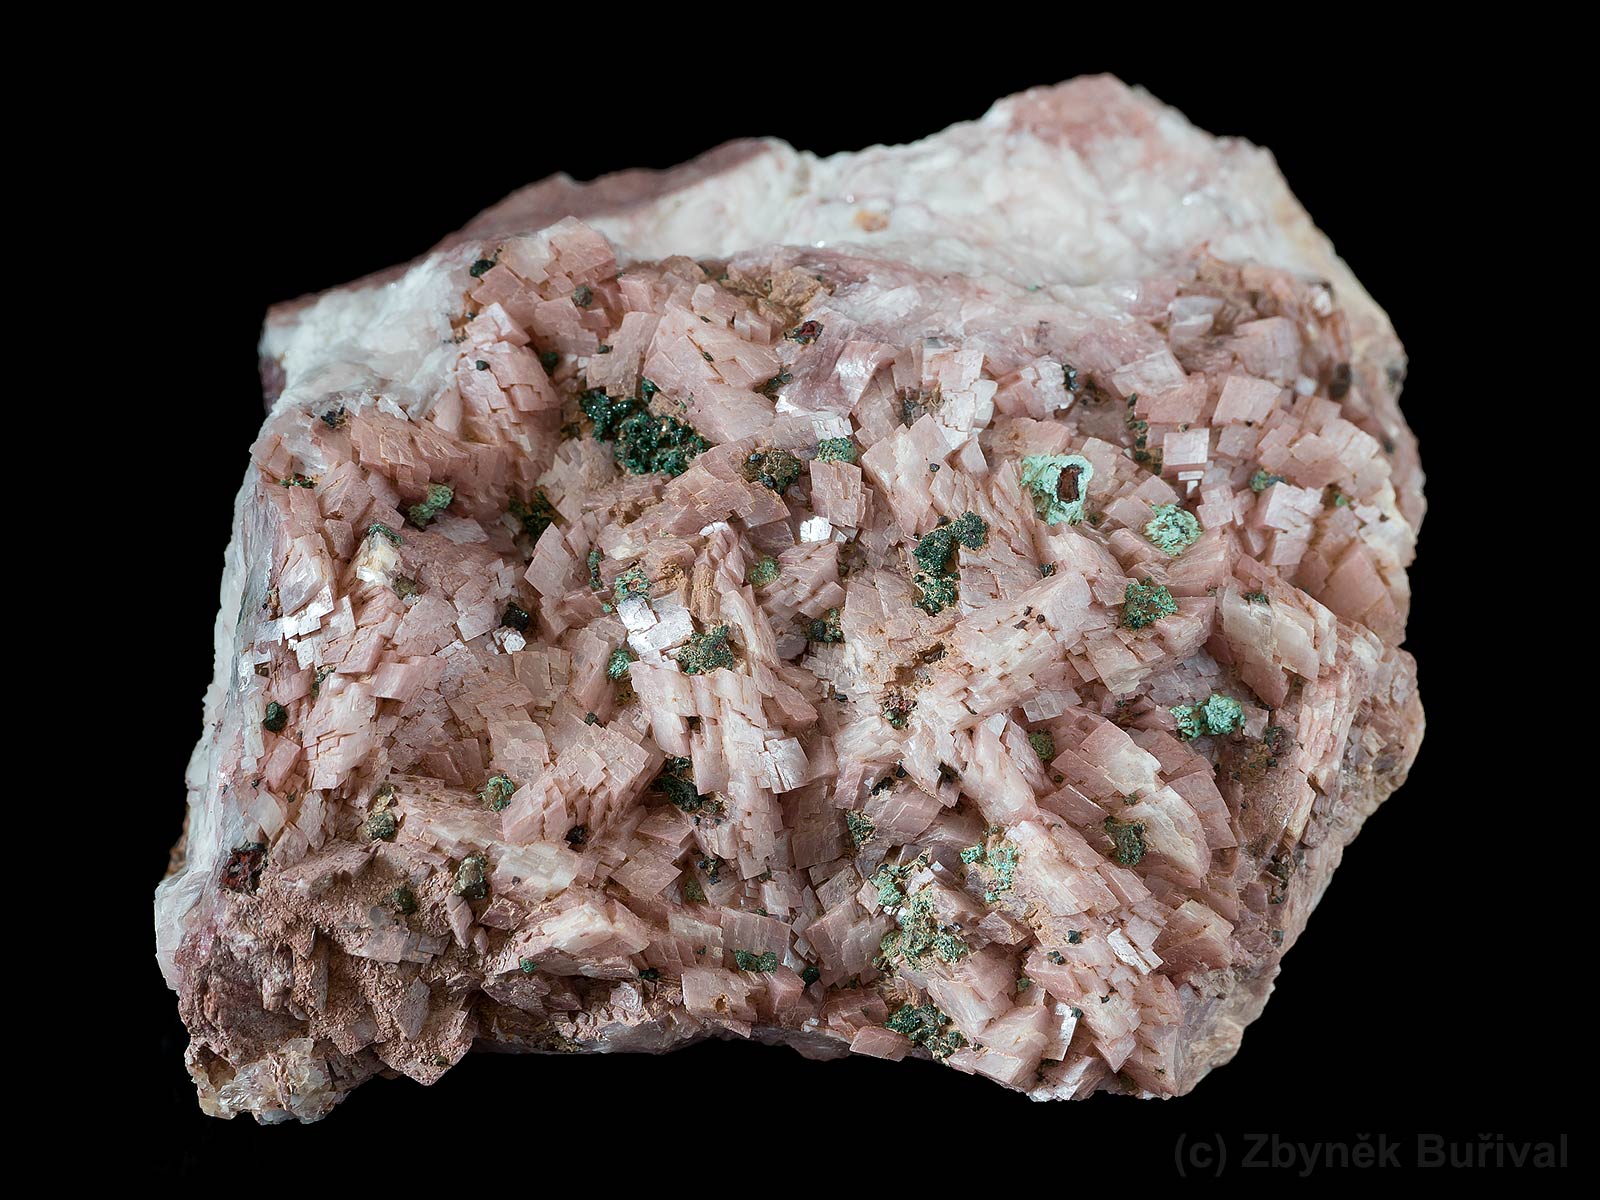 Cluster of pink dolomite crystals with tiny crystals of green brochantite from Touissit, Morocco